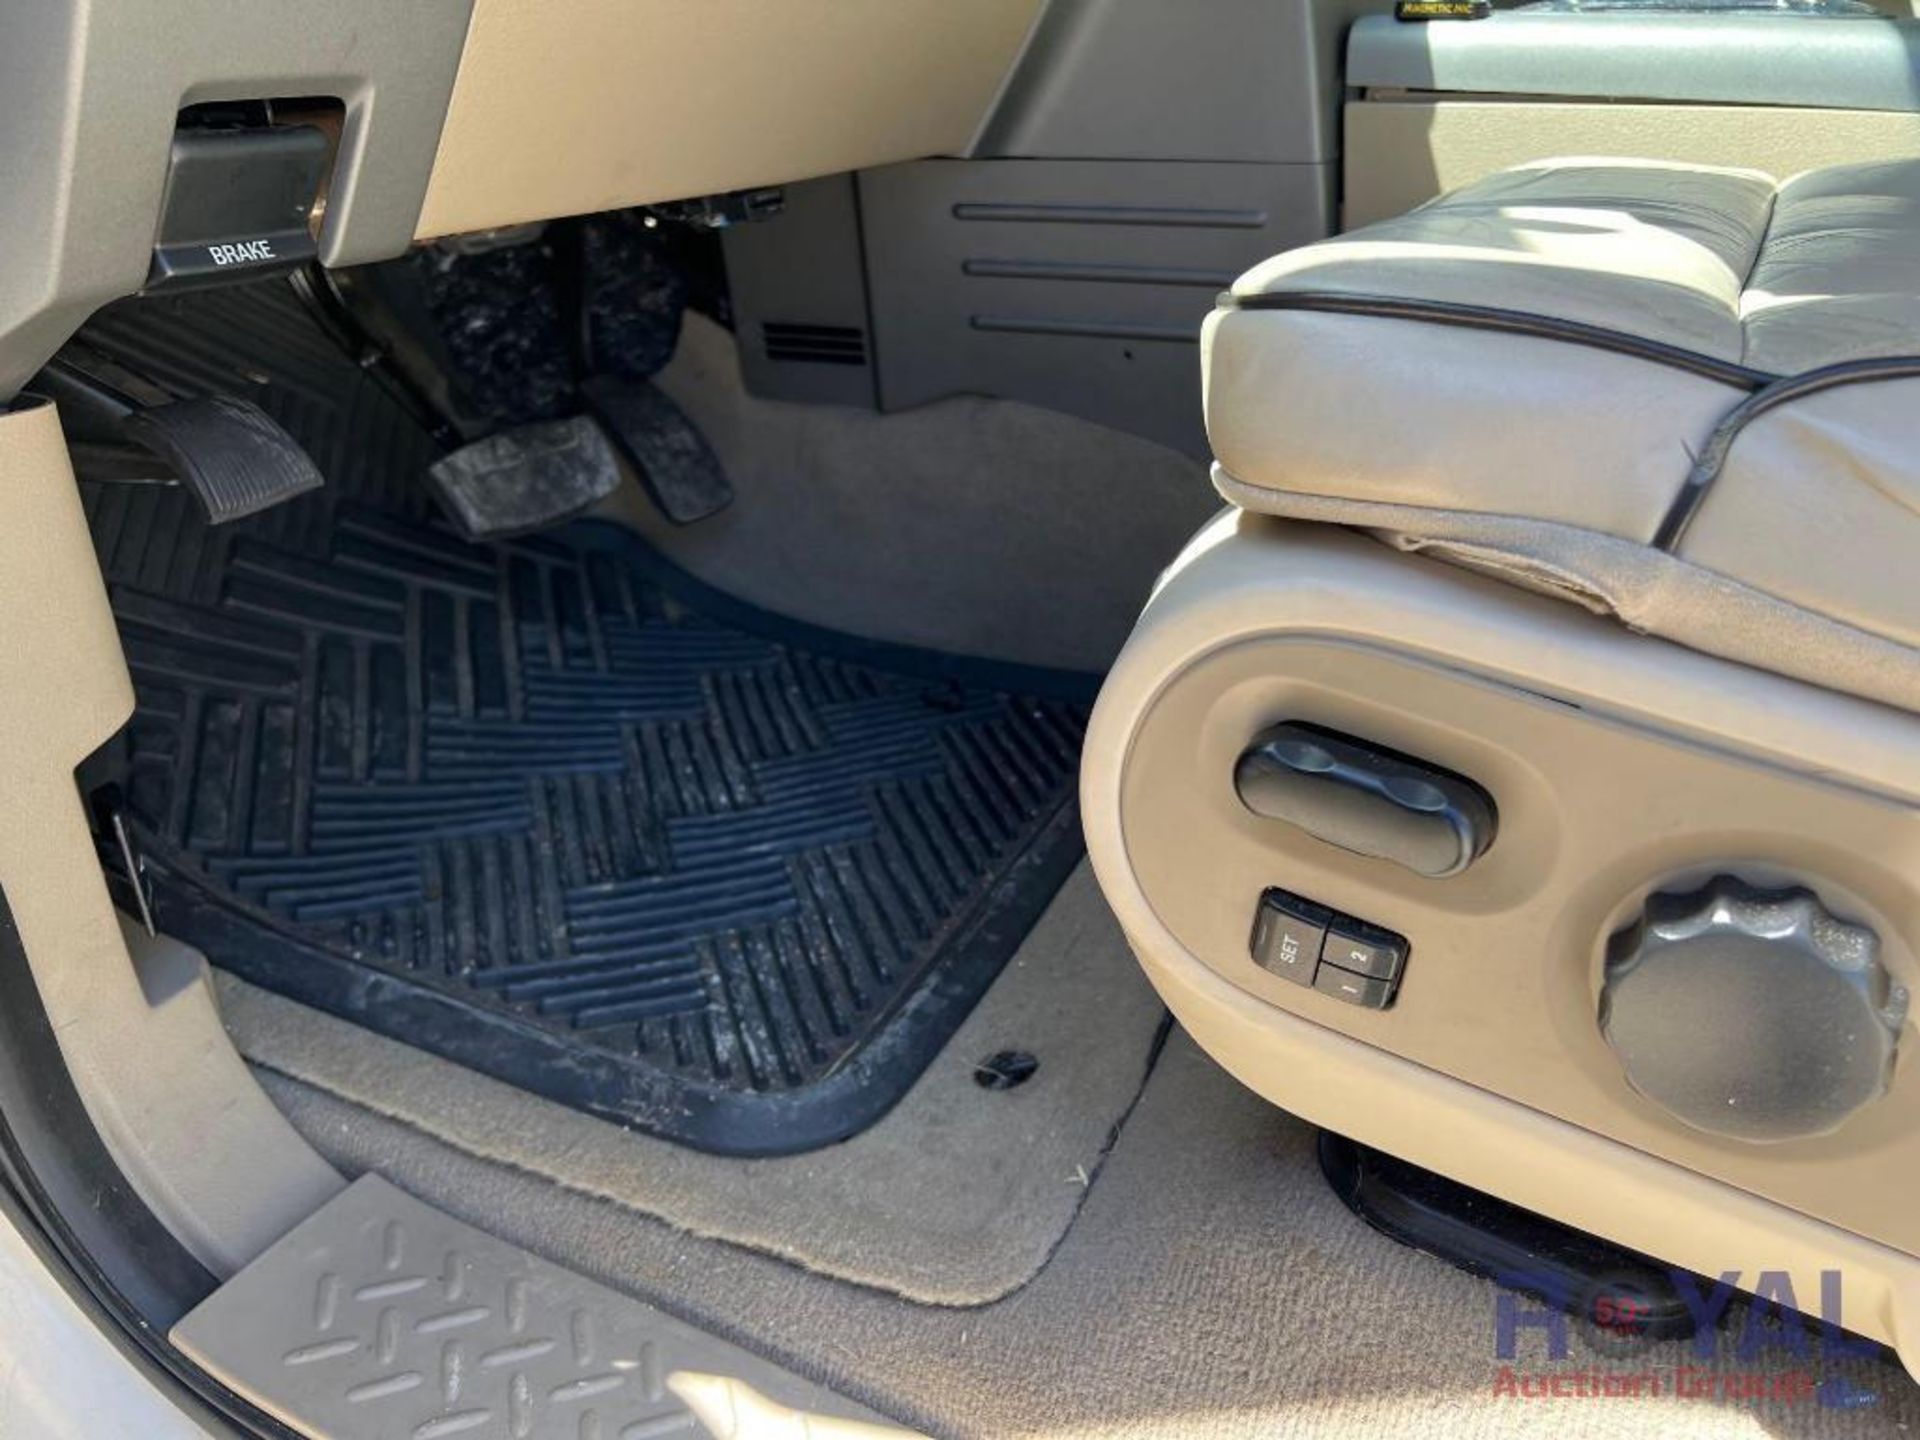 2015 Lincoln Mark LT Crew Cab Pickup Truck - Image 25 of 75